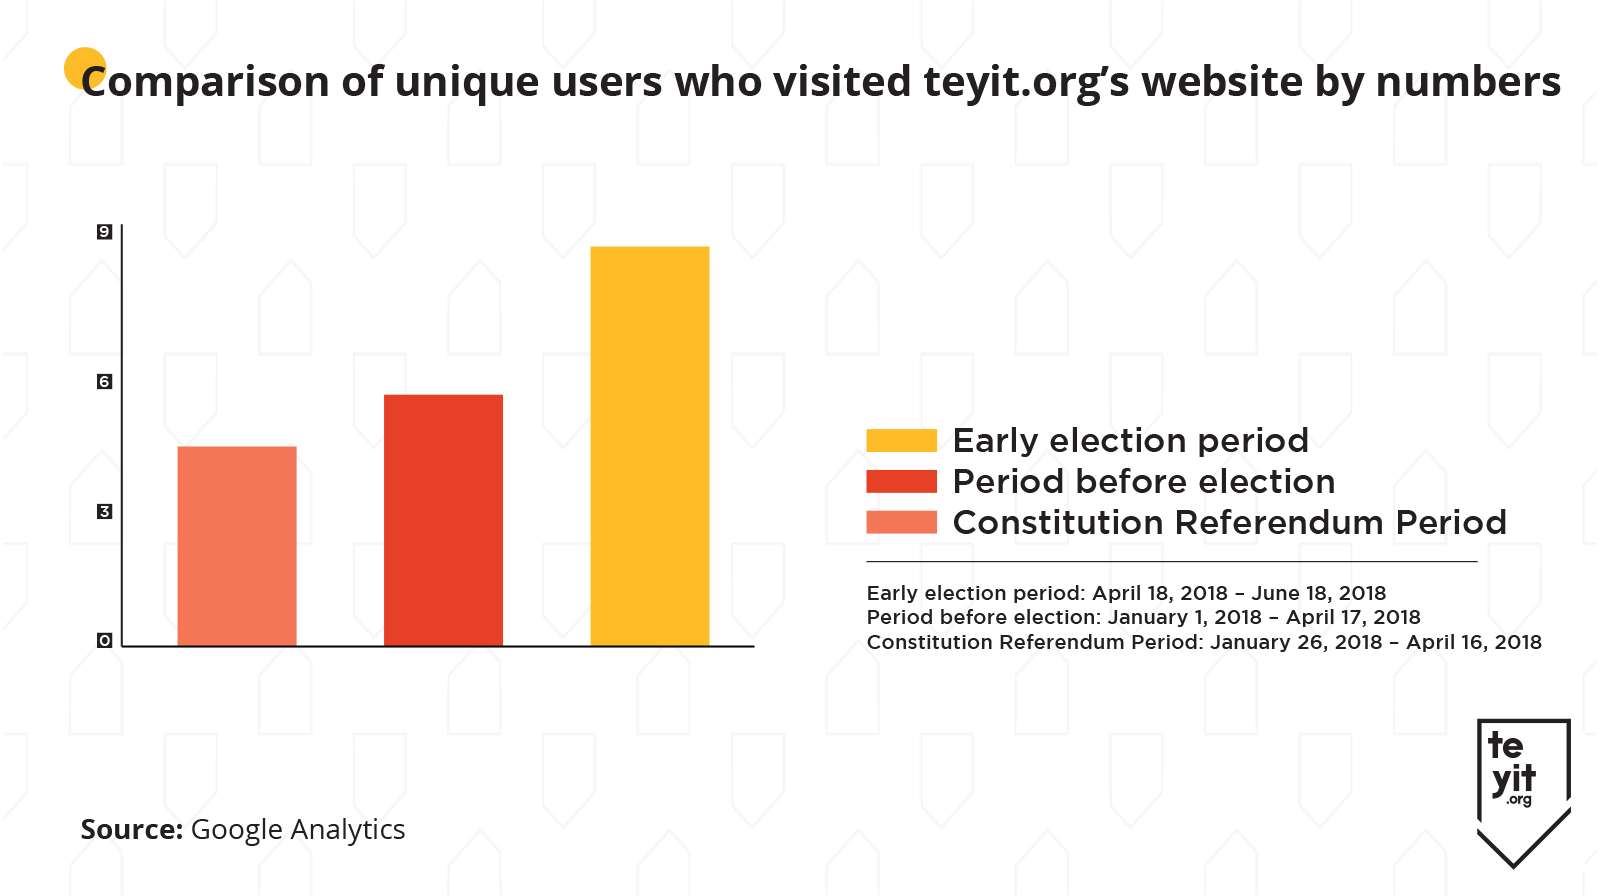 Towards the election: Number of suspicious news sent to teyit.org increased by 80 percent